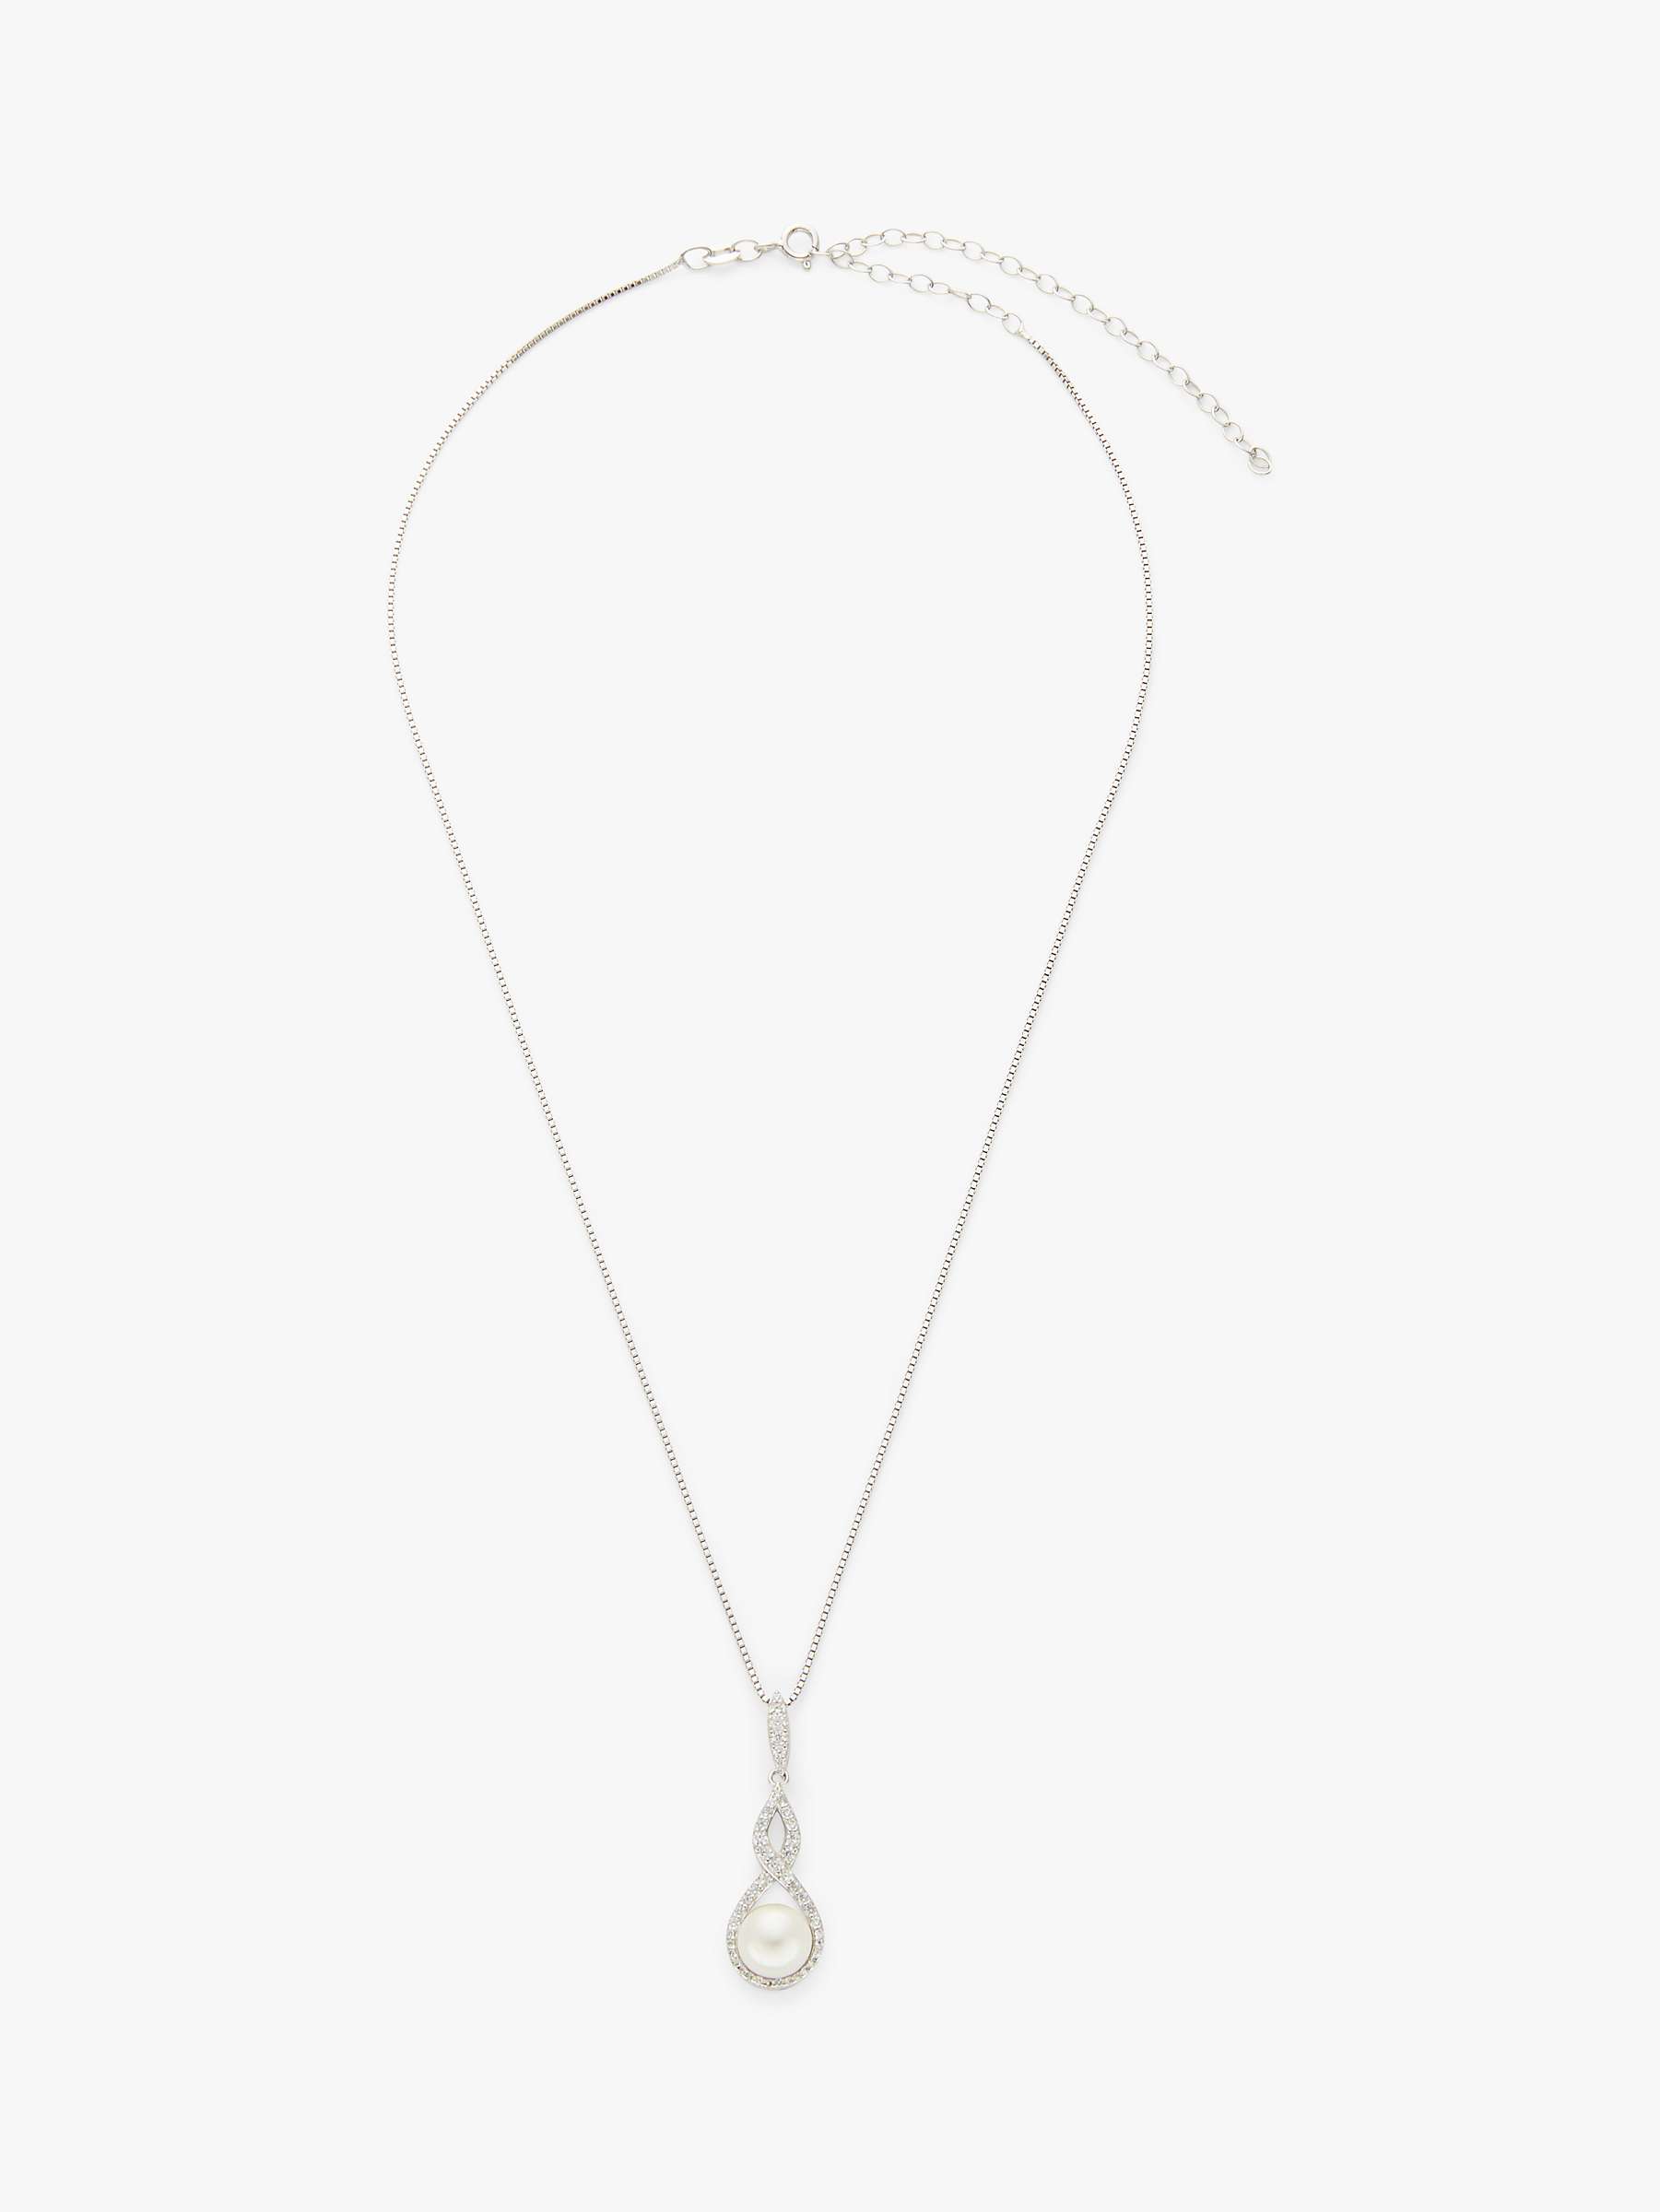 Buy Lido Pearls Cubic Zirconia and Freshwater Pearl Infinity Pendant Necklace, Silver/White Online at johnlewis.com